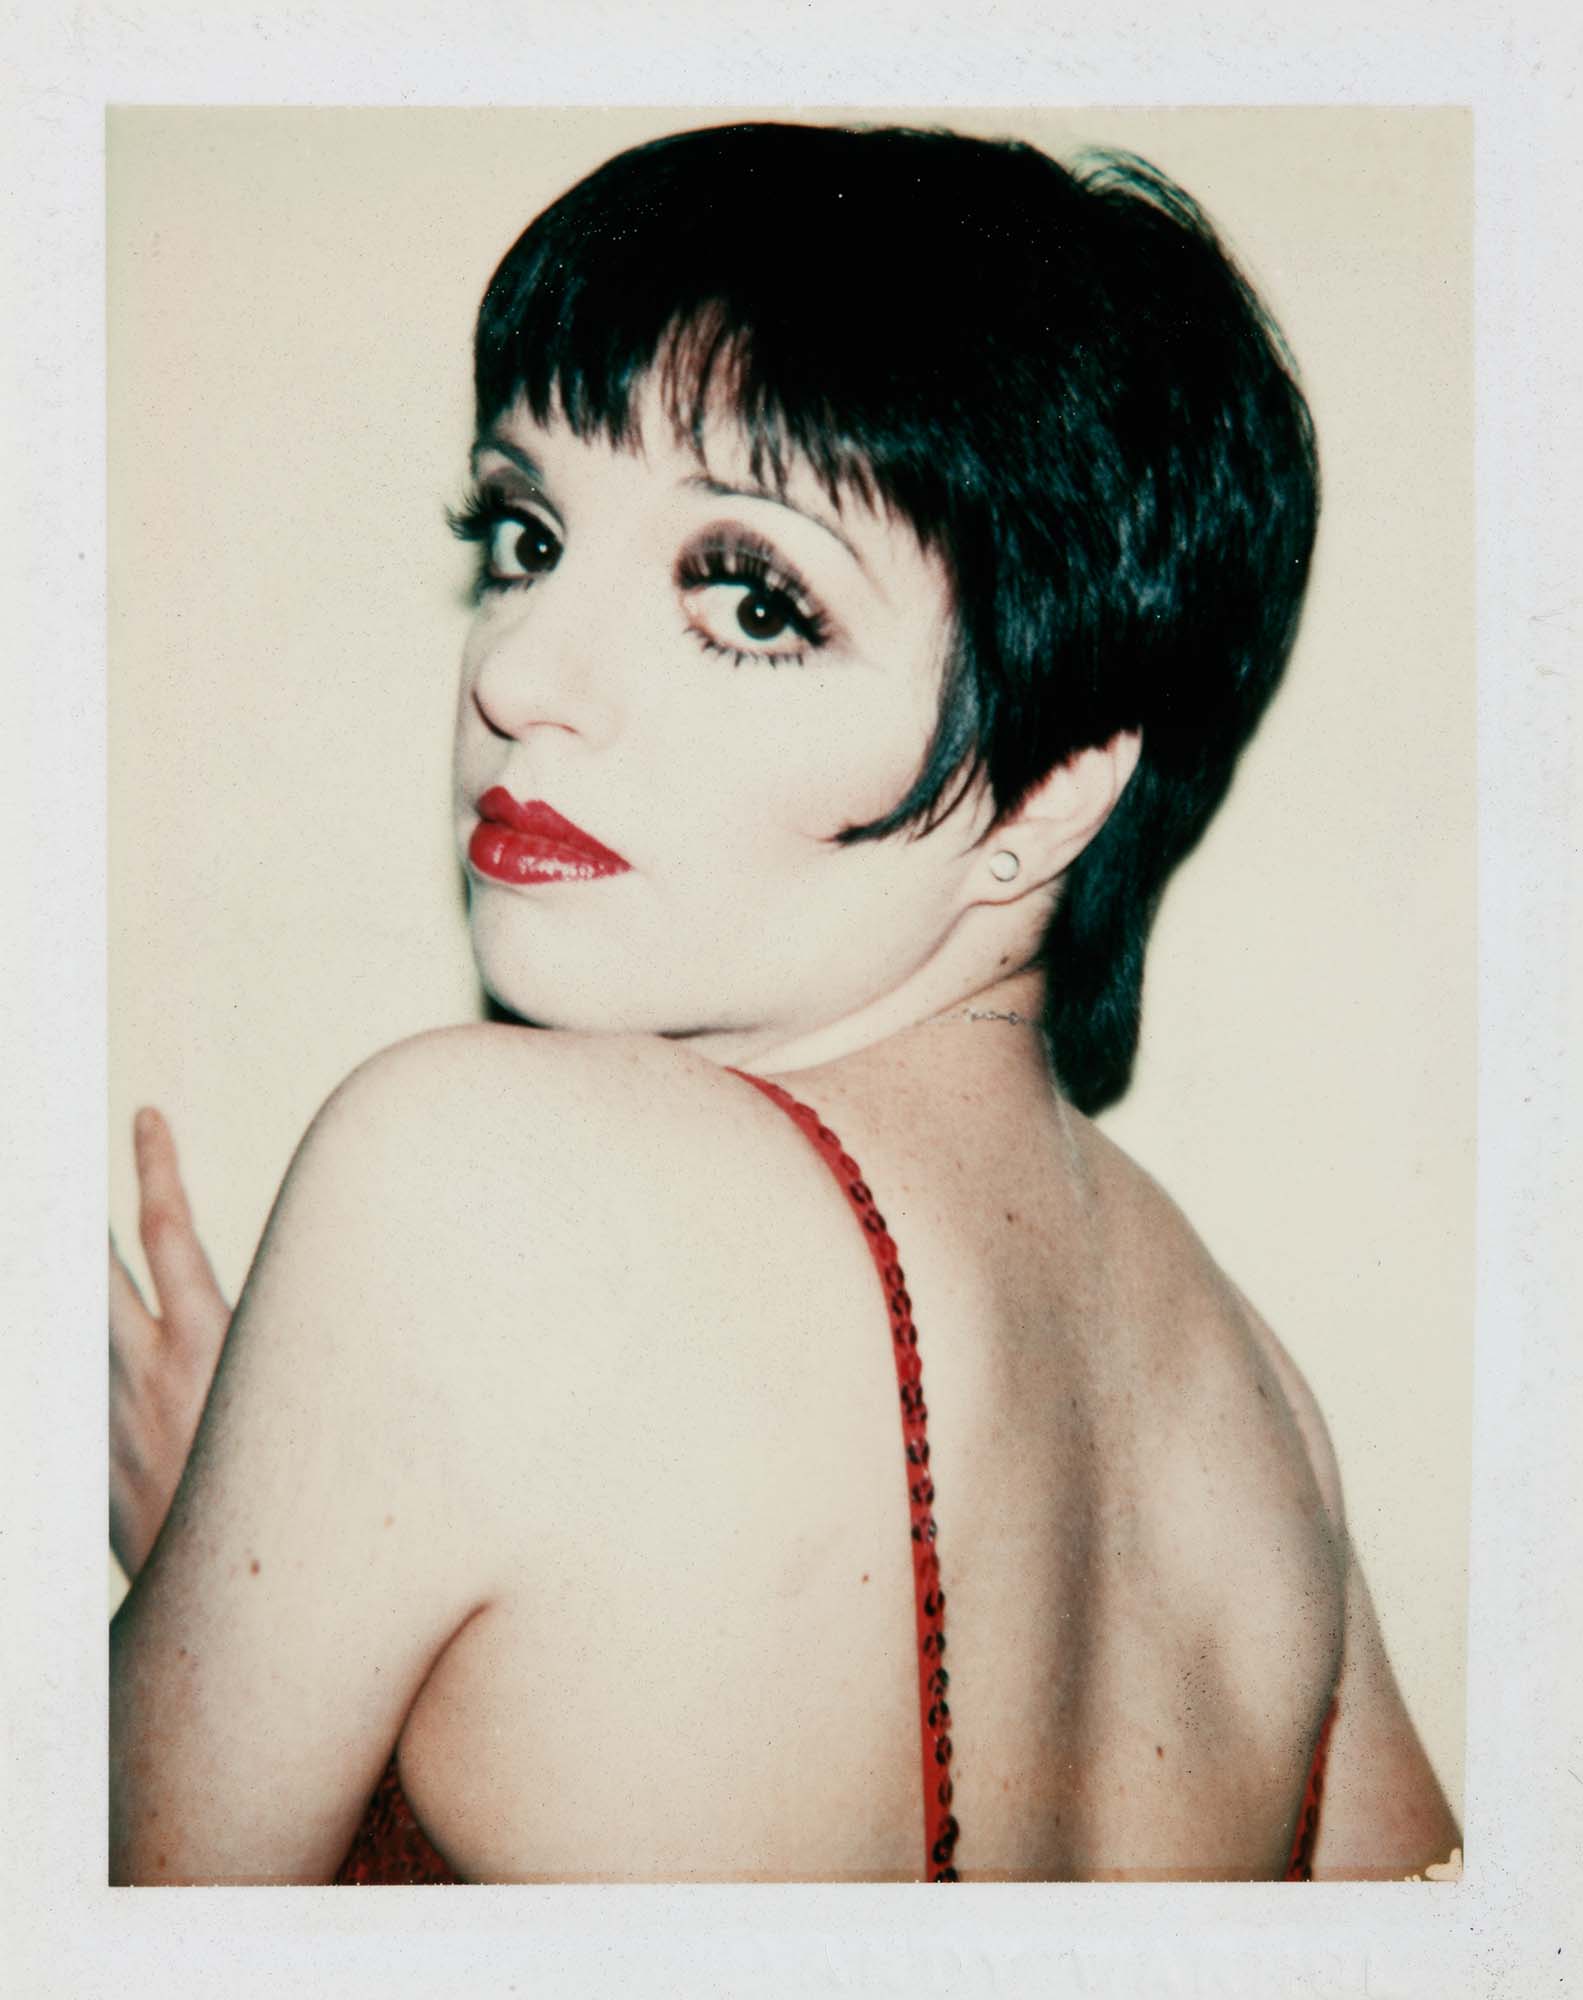 Andy Warhol, born Pittsburgh, Pennsylvania, United States 1928, died New York, United States 1987, <em>Liza Minnelli</em>, 1978, New York, PolaroidTM Polacolor Type 108, 9.5 x 7.3 cm (image), 10.8 x 8.5 cm (sheet); V.B.F. Young Bequest Fund 2012, Art Gallery of South Australia, Adelaide, © Andy Warhol Foundation for the Visual Arts, Inc. ARS/Copyright Agency